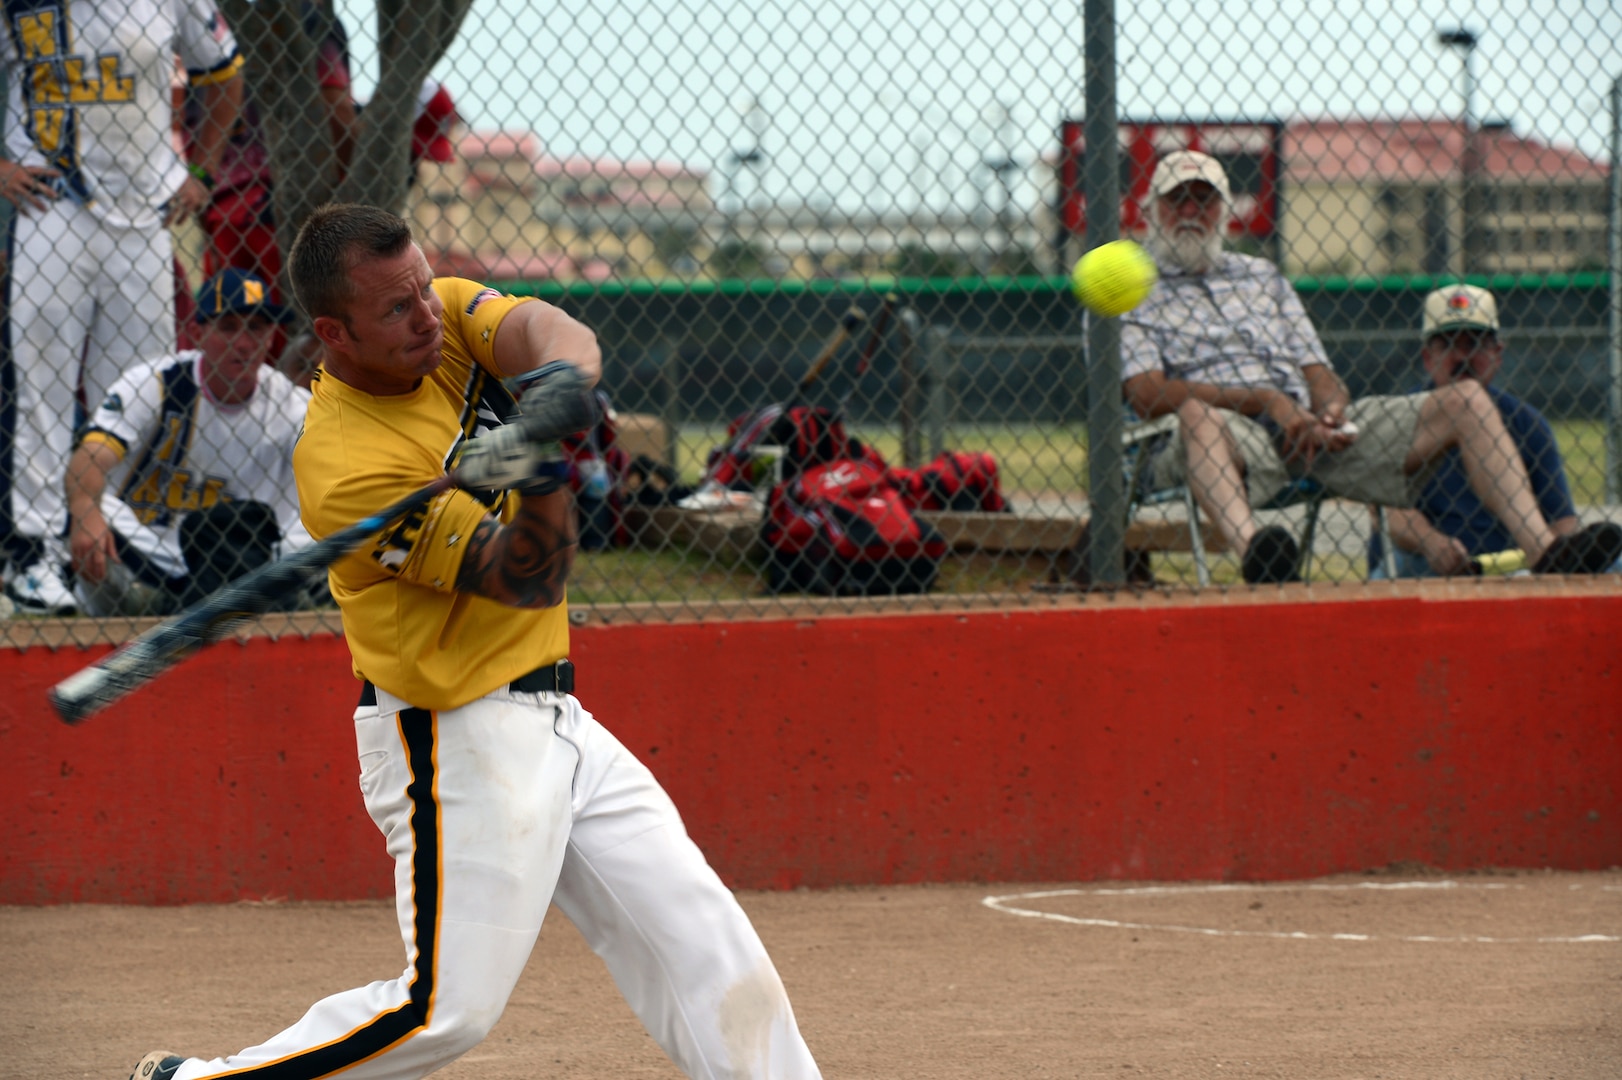 Staff Sgt. Kenny Turlington of Camp Humphreys, South Korea, goes 5-for-5 with four home runs to lead All-Army to a 23-8 victory over All-Air Force in the gold-medal game of the 2013 Armed Forces Softball Championships at Fort Sill, Okla., Sept. 17, 2013.